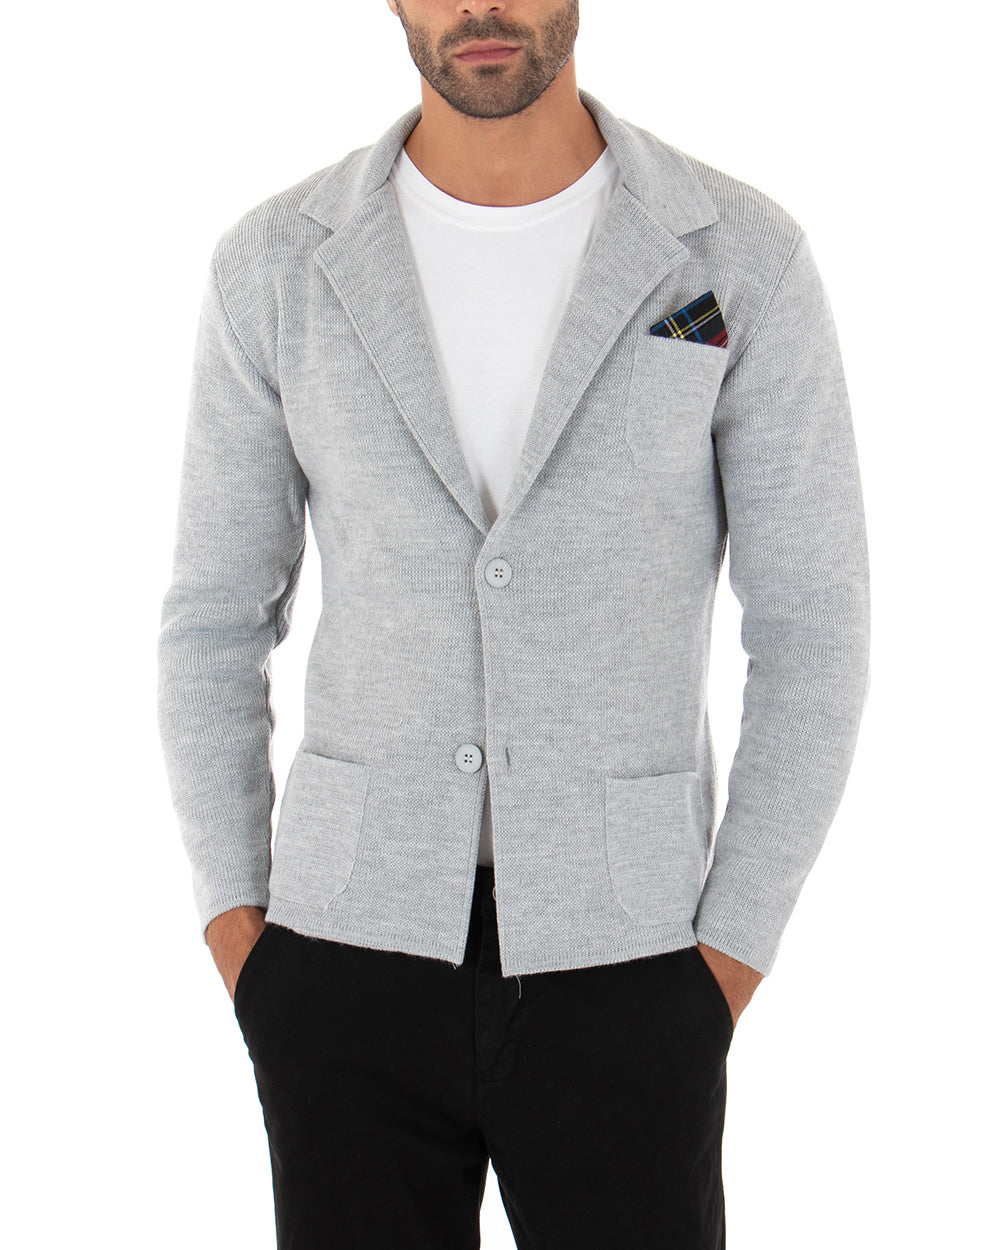 Men's Cardigan Jacket With Buttons Knit Sweater Solid Color Casual Gray GIOSAL-M2662A